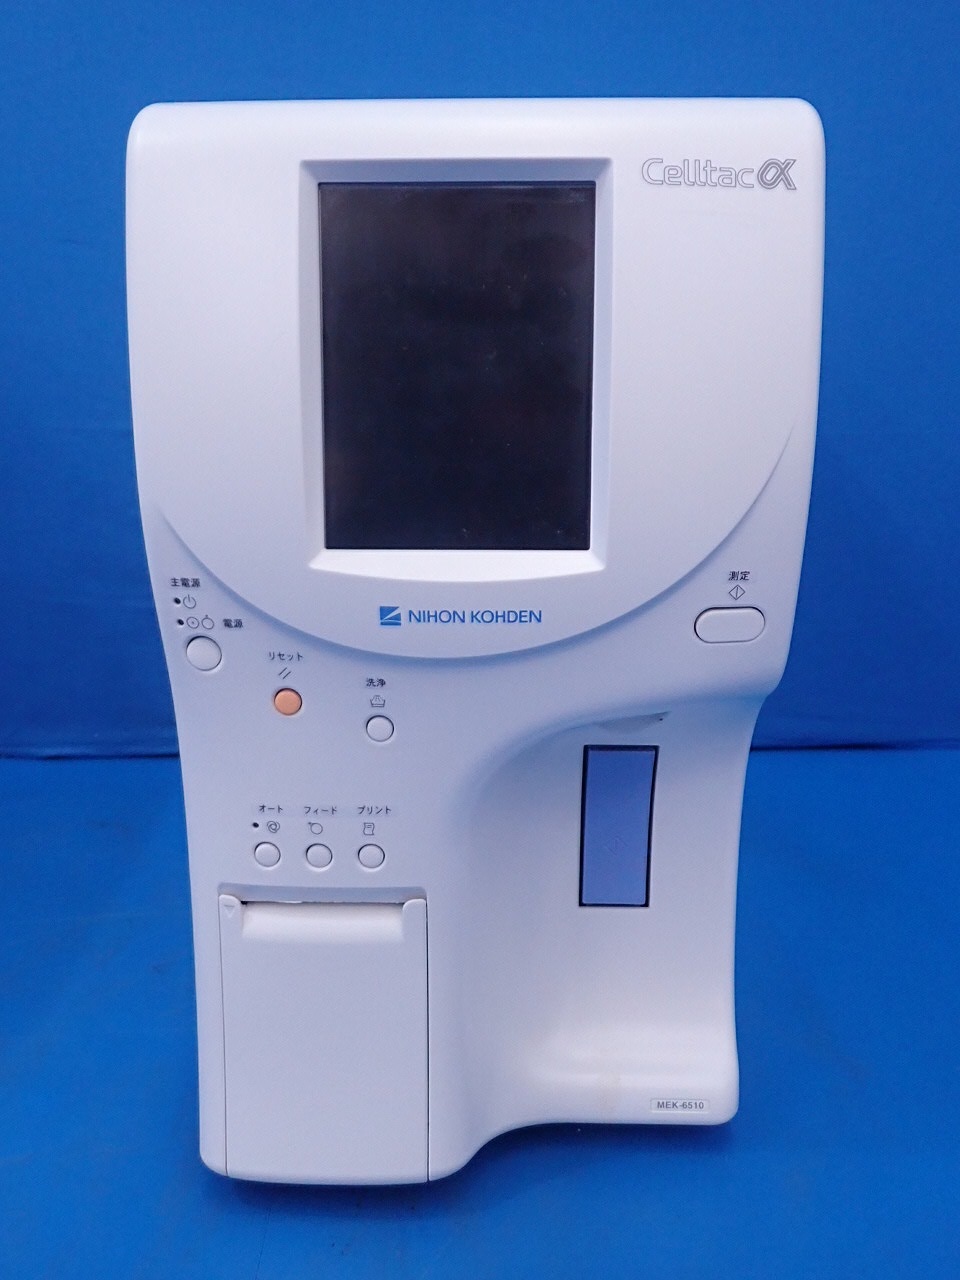 Auto Blood Cell Counter & CRP measuring instrument